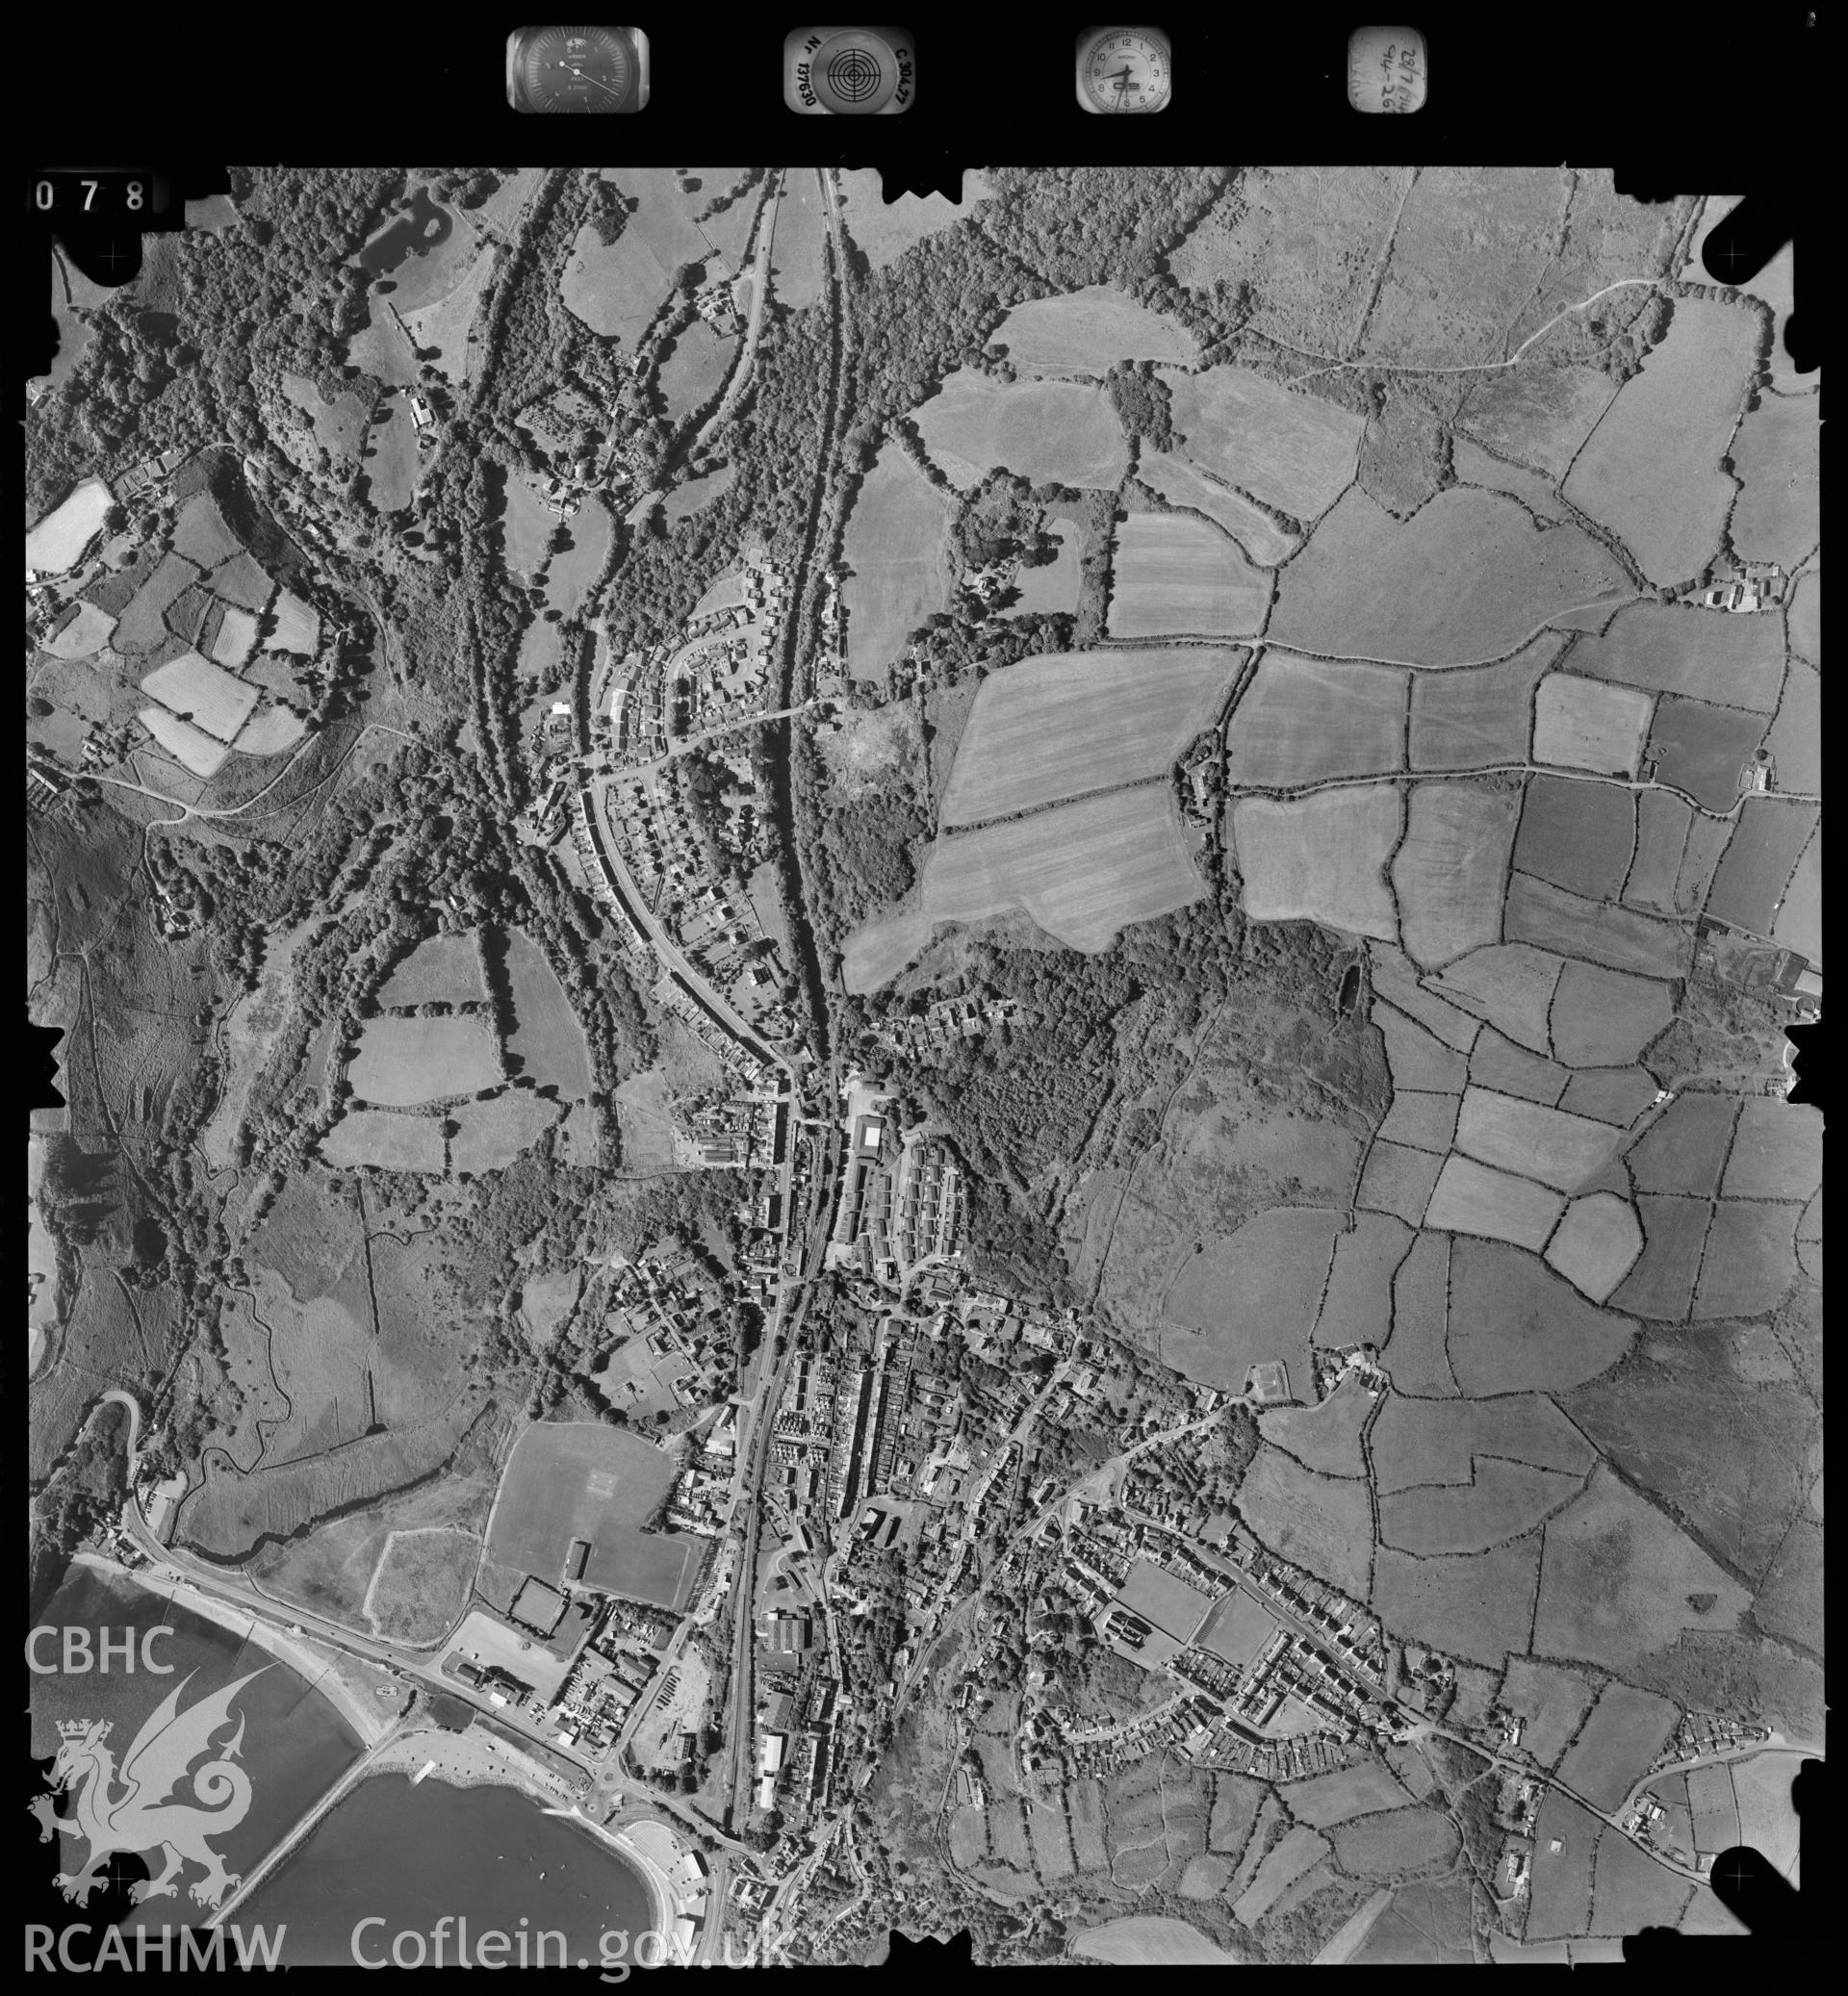 Digitized copy of an aerial photograph showing the Fishguard area,  taken by Ordnance Survey, 1994